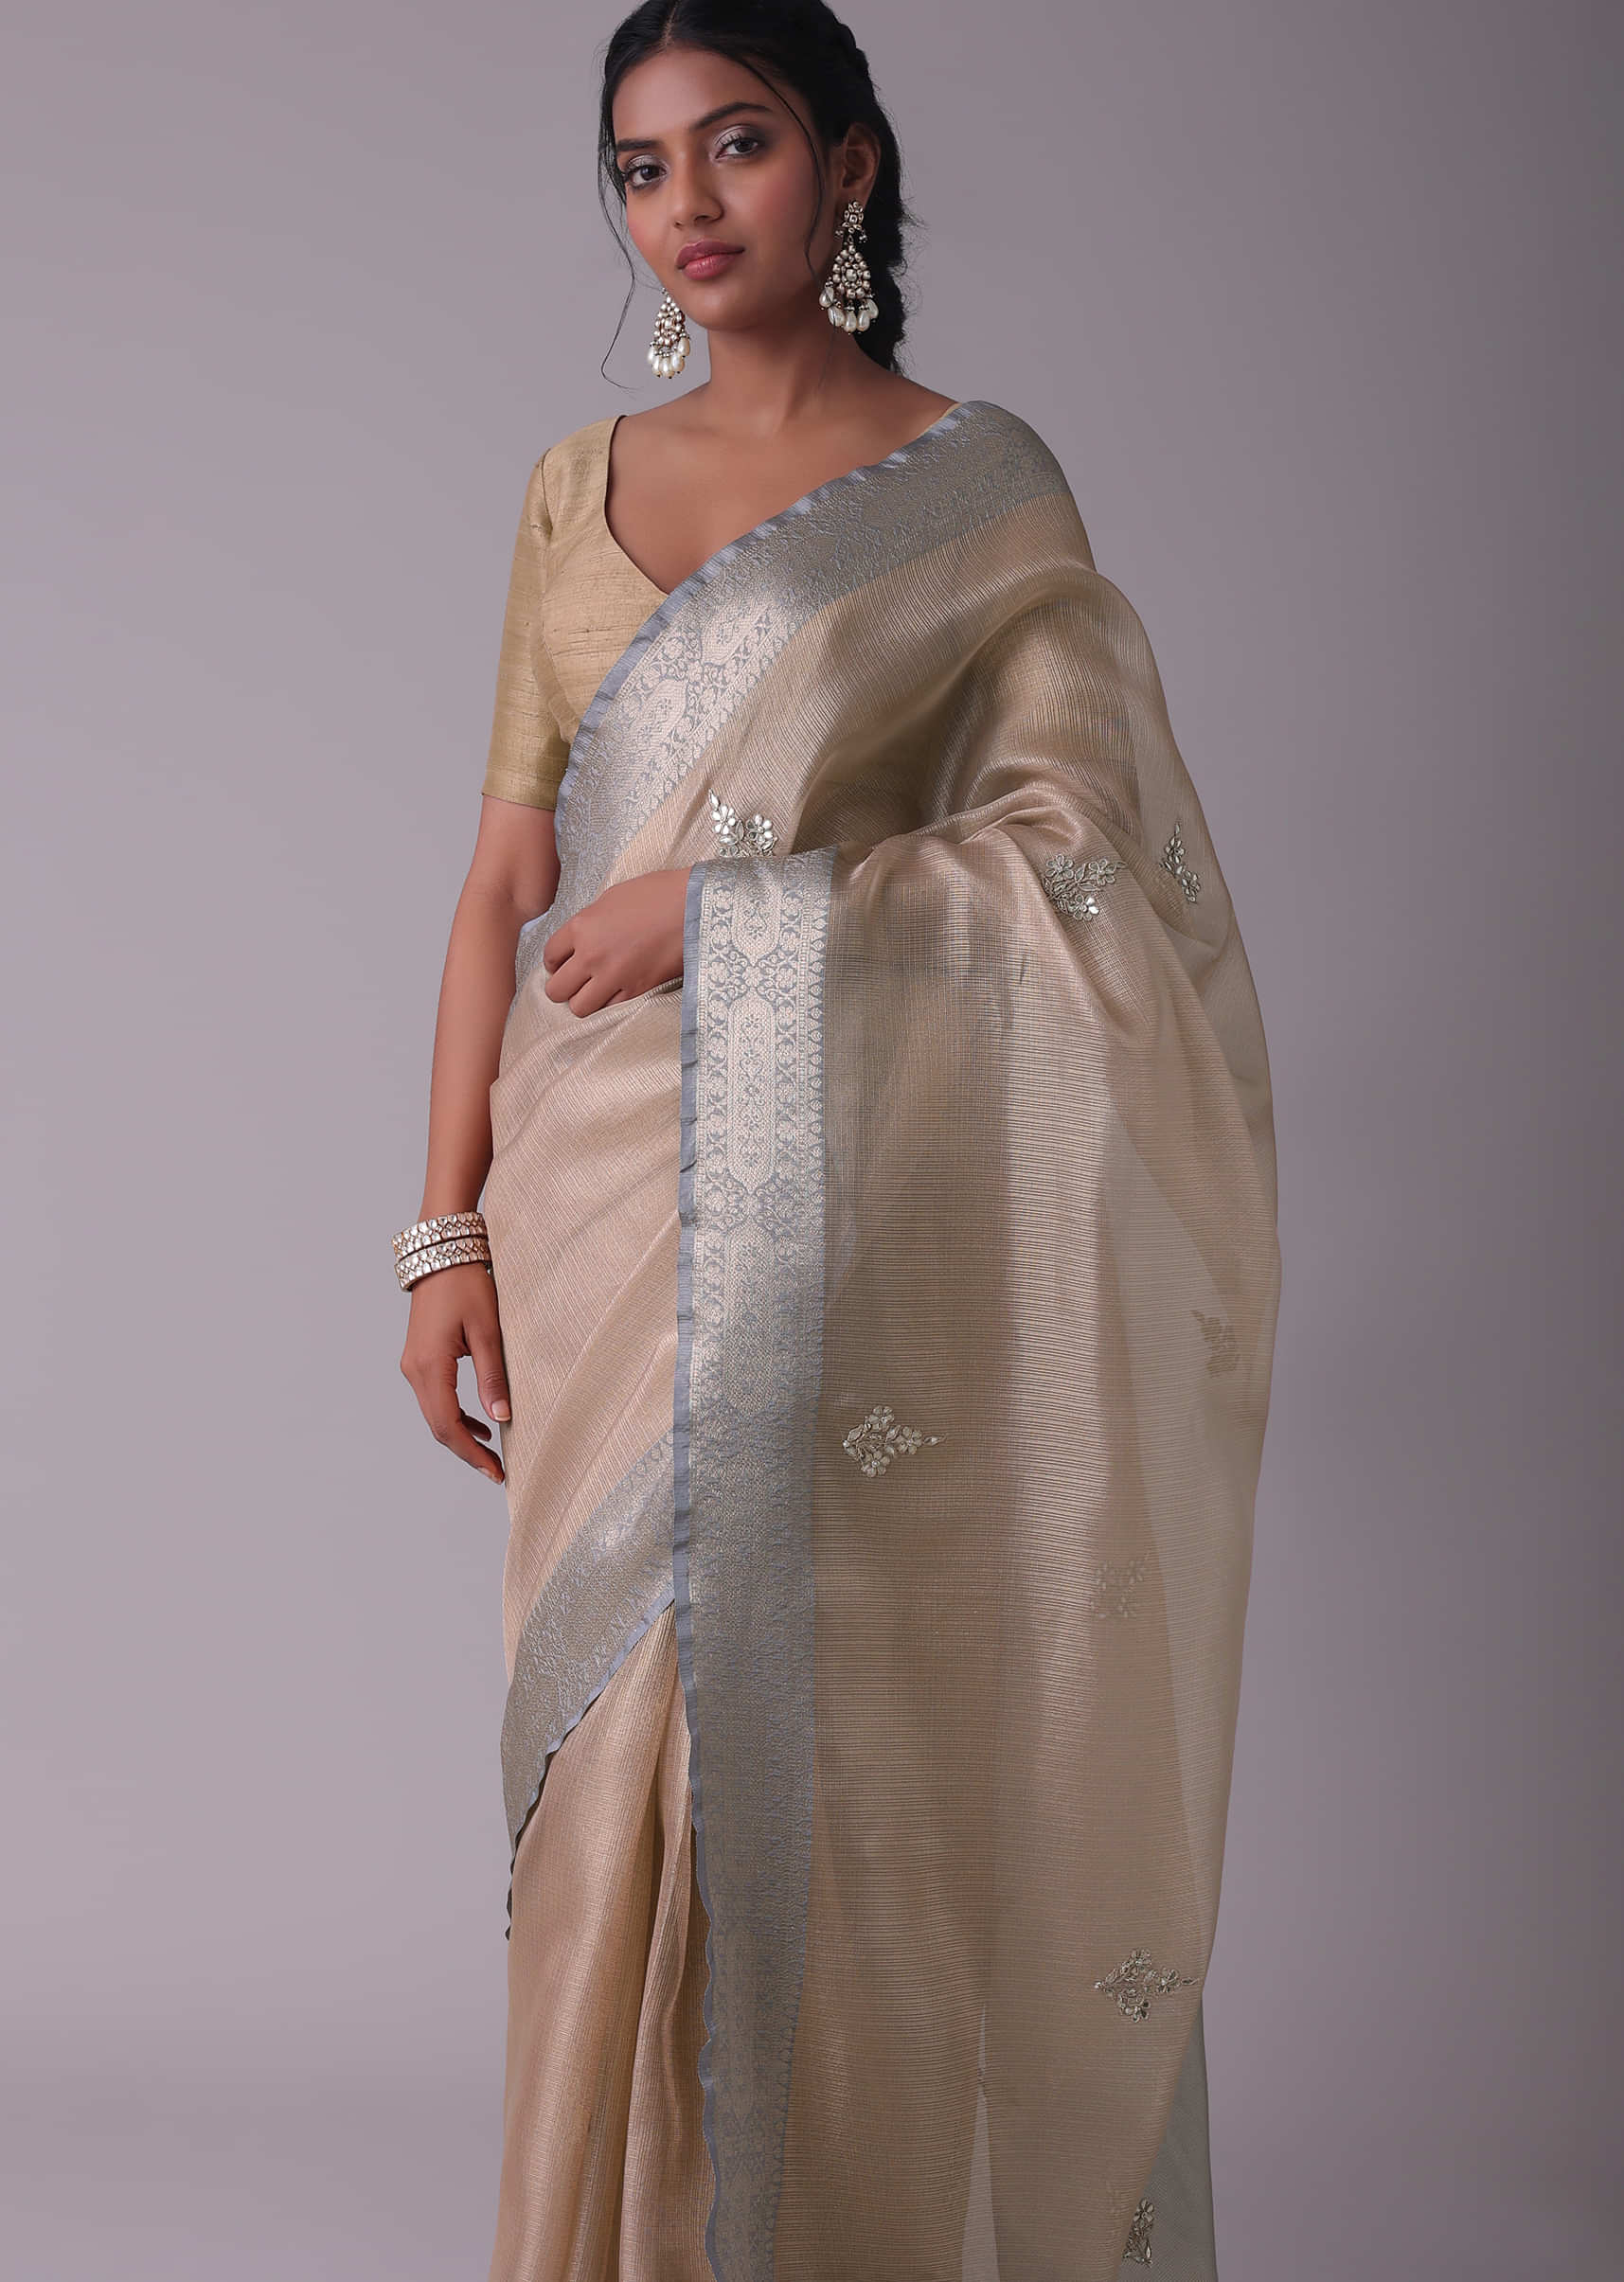 Champagne Gold And Blue Toned Glass Tissue Saree With Embroidery 